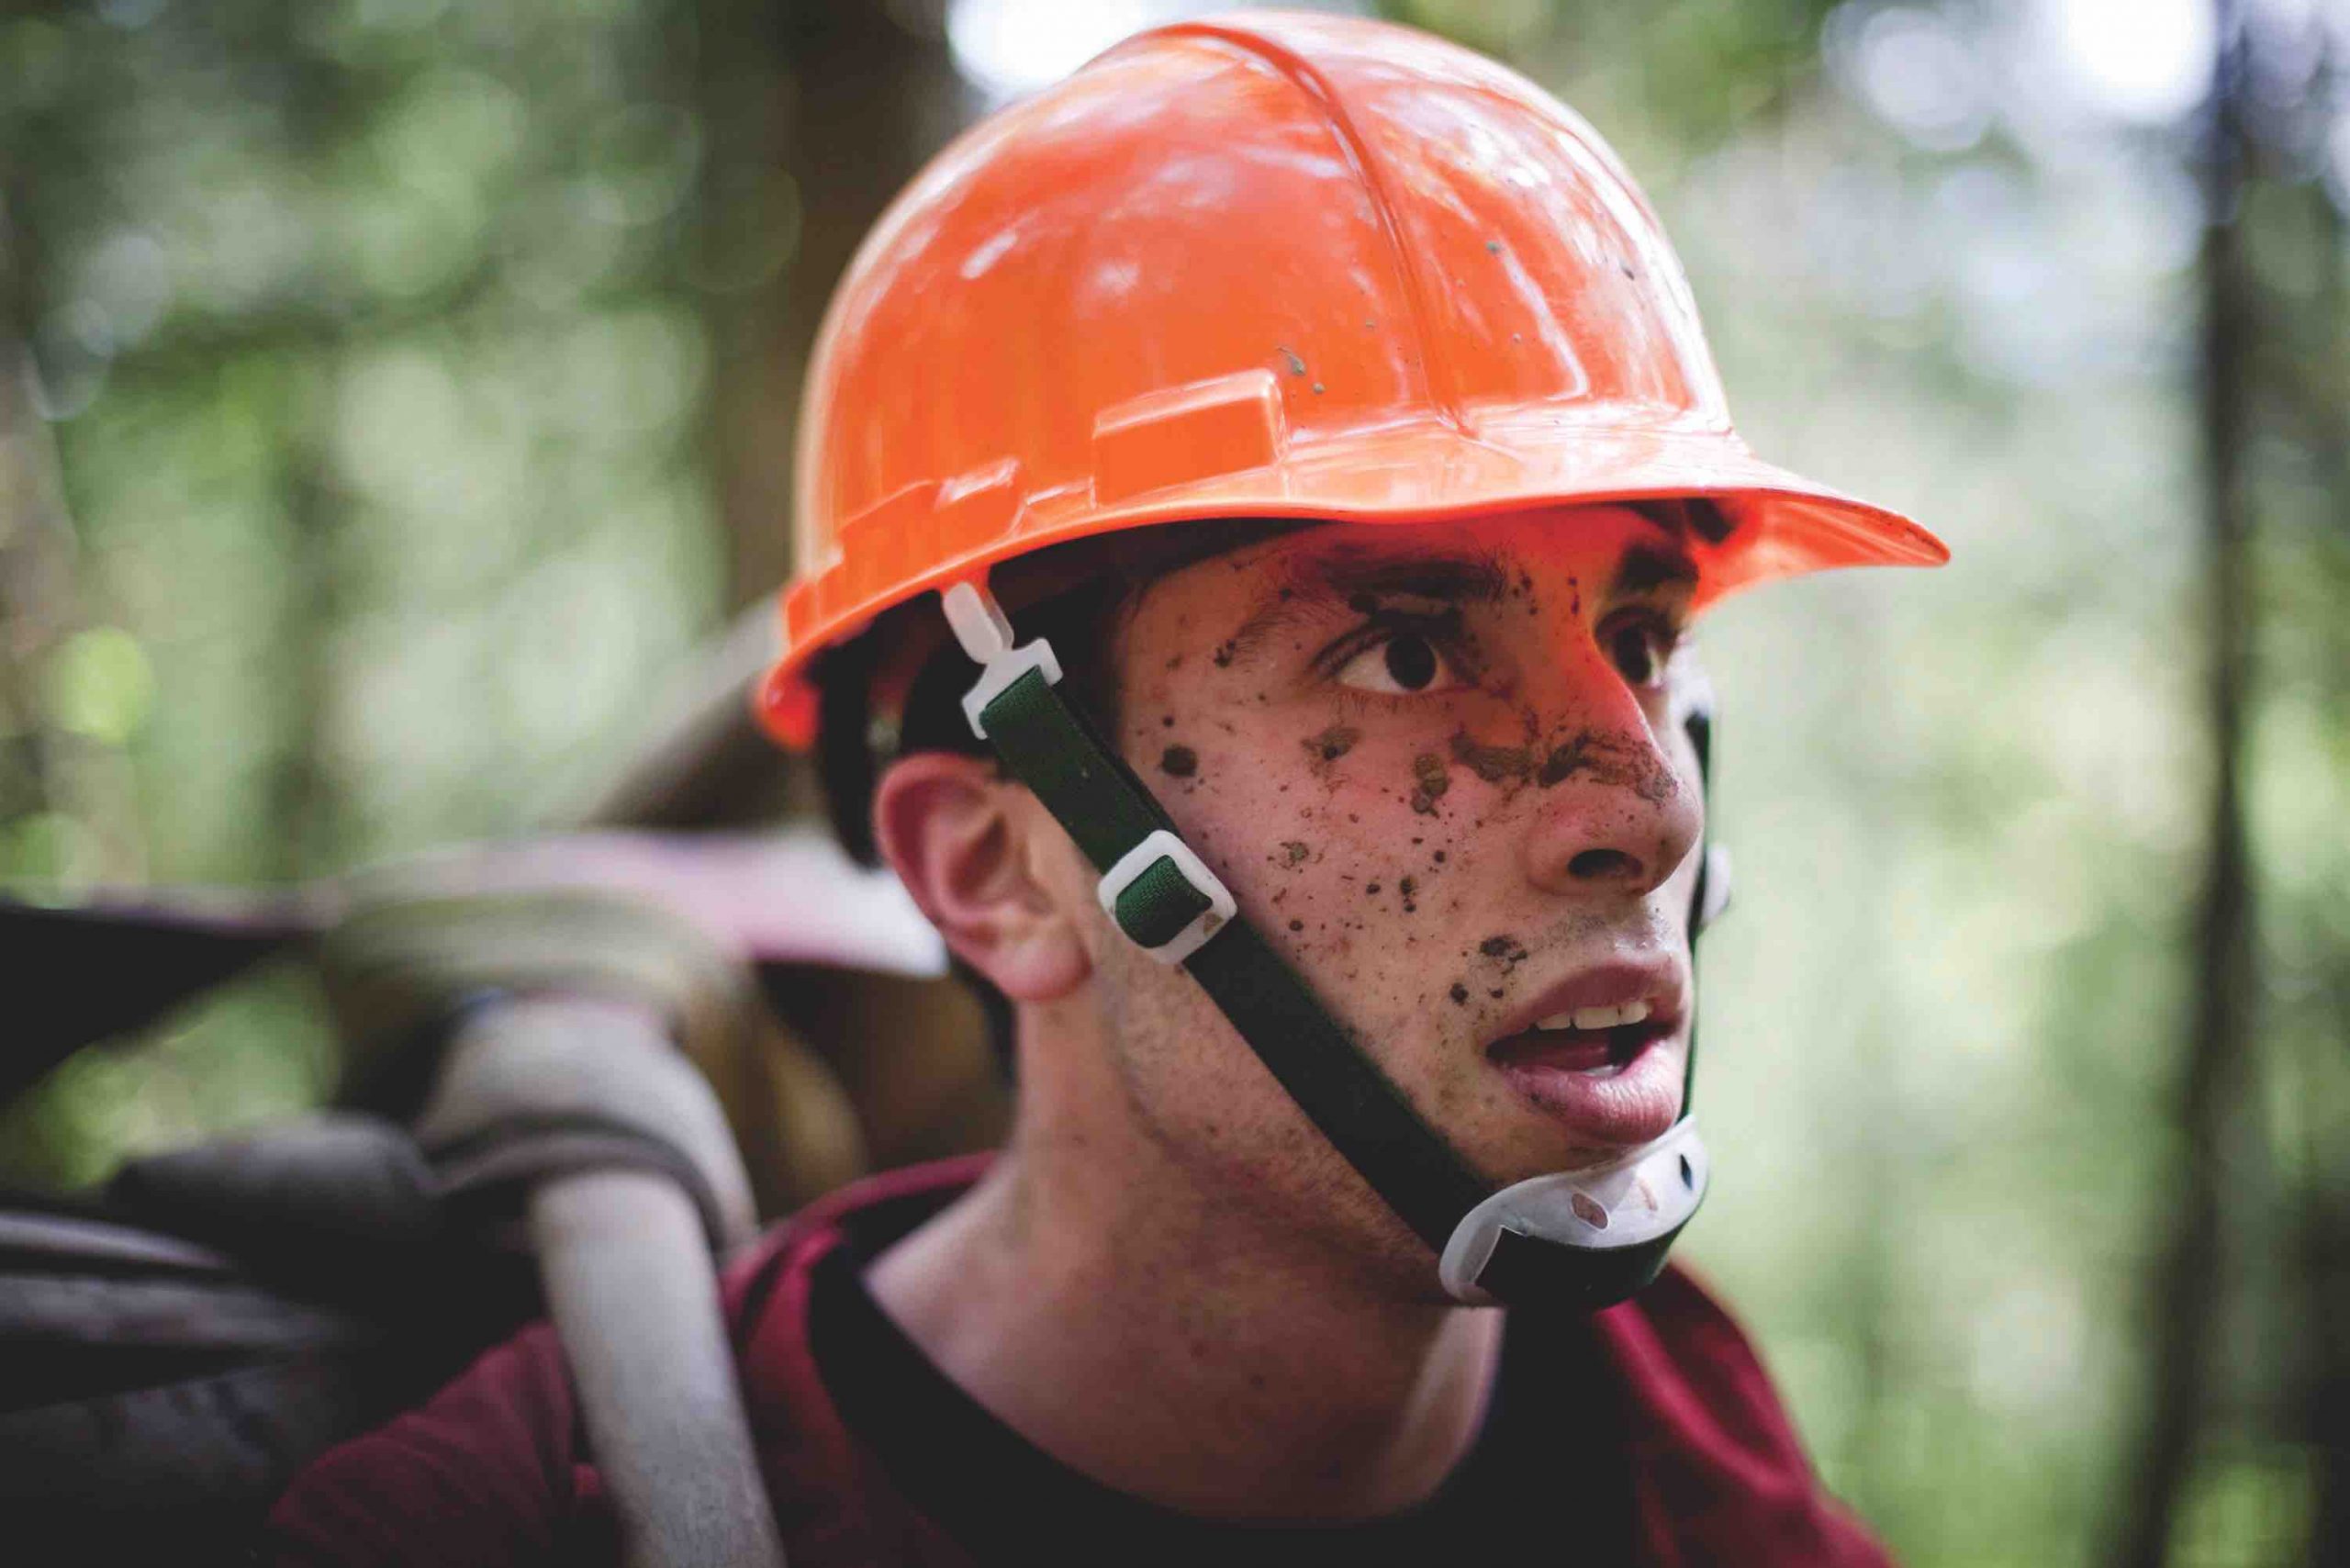 Close up of a young man with an orange helmet and mud splattered on his face. He is carrying a large backpack and surrounded by trees. 